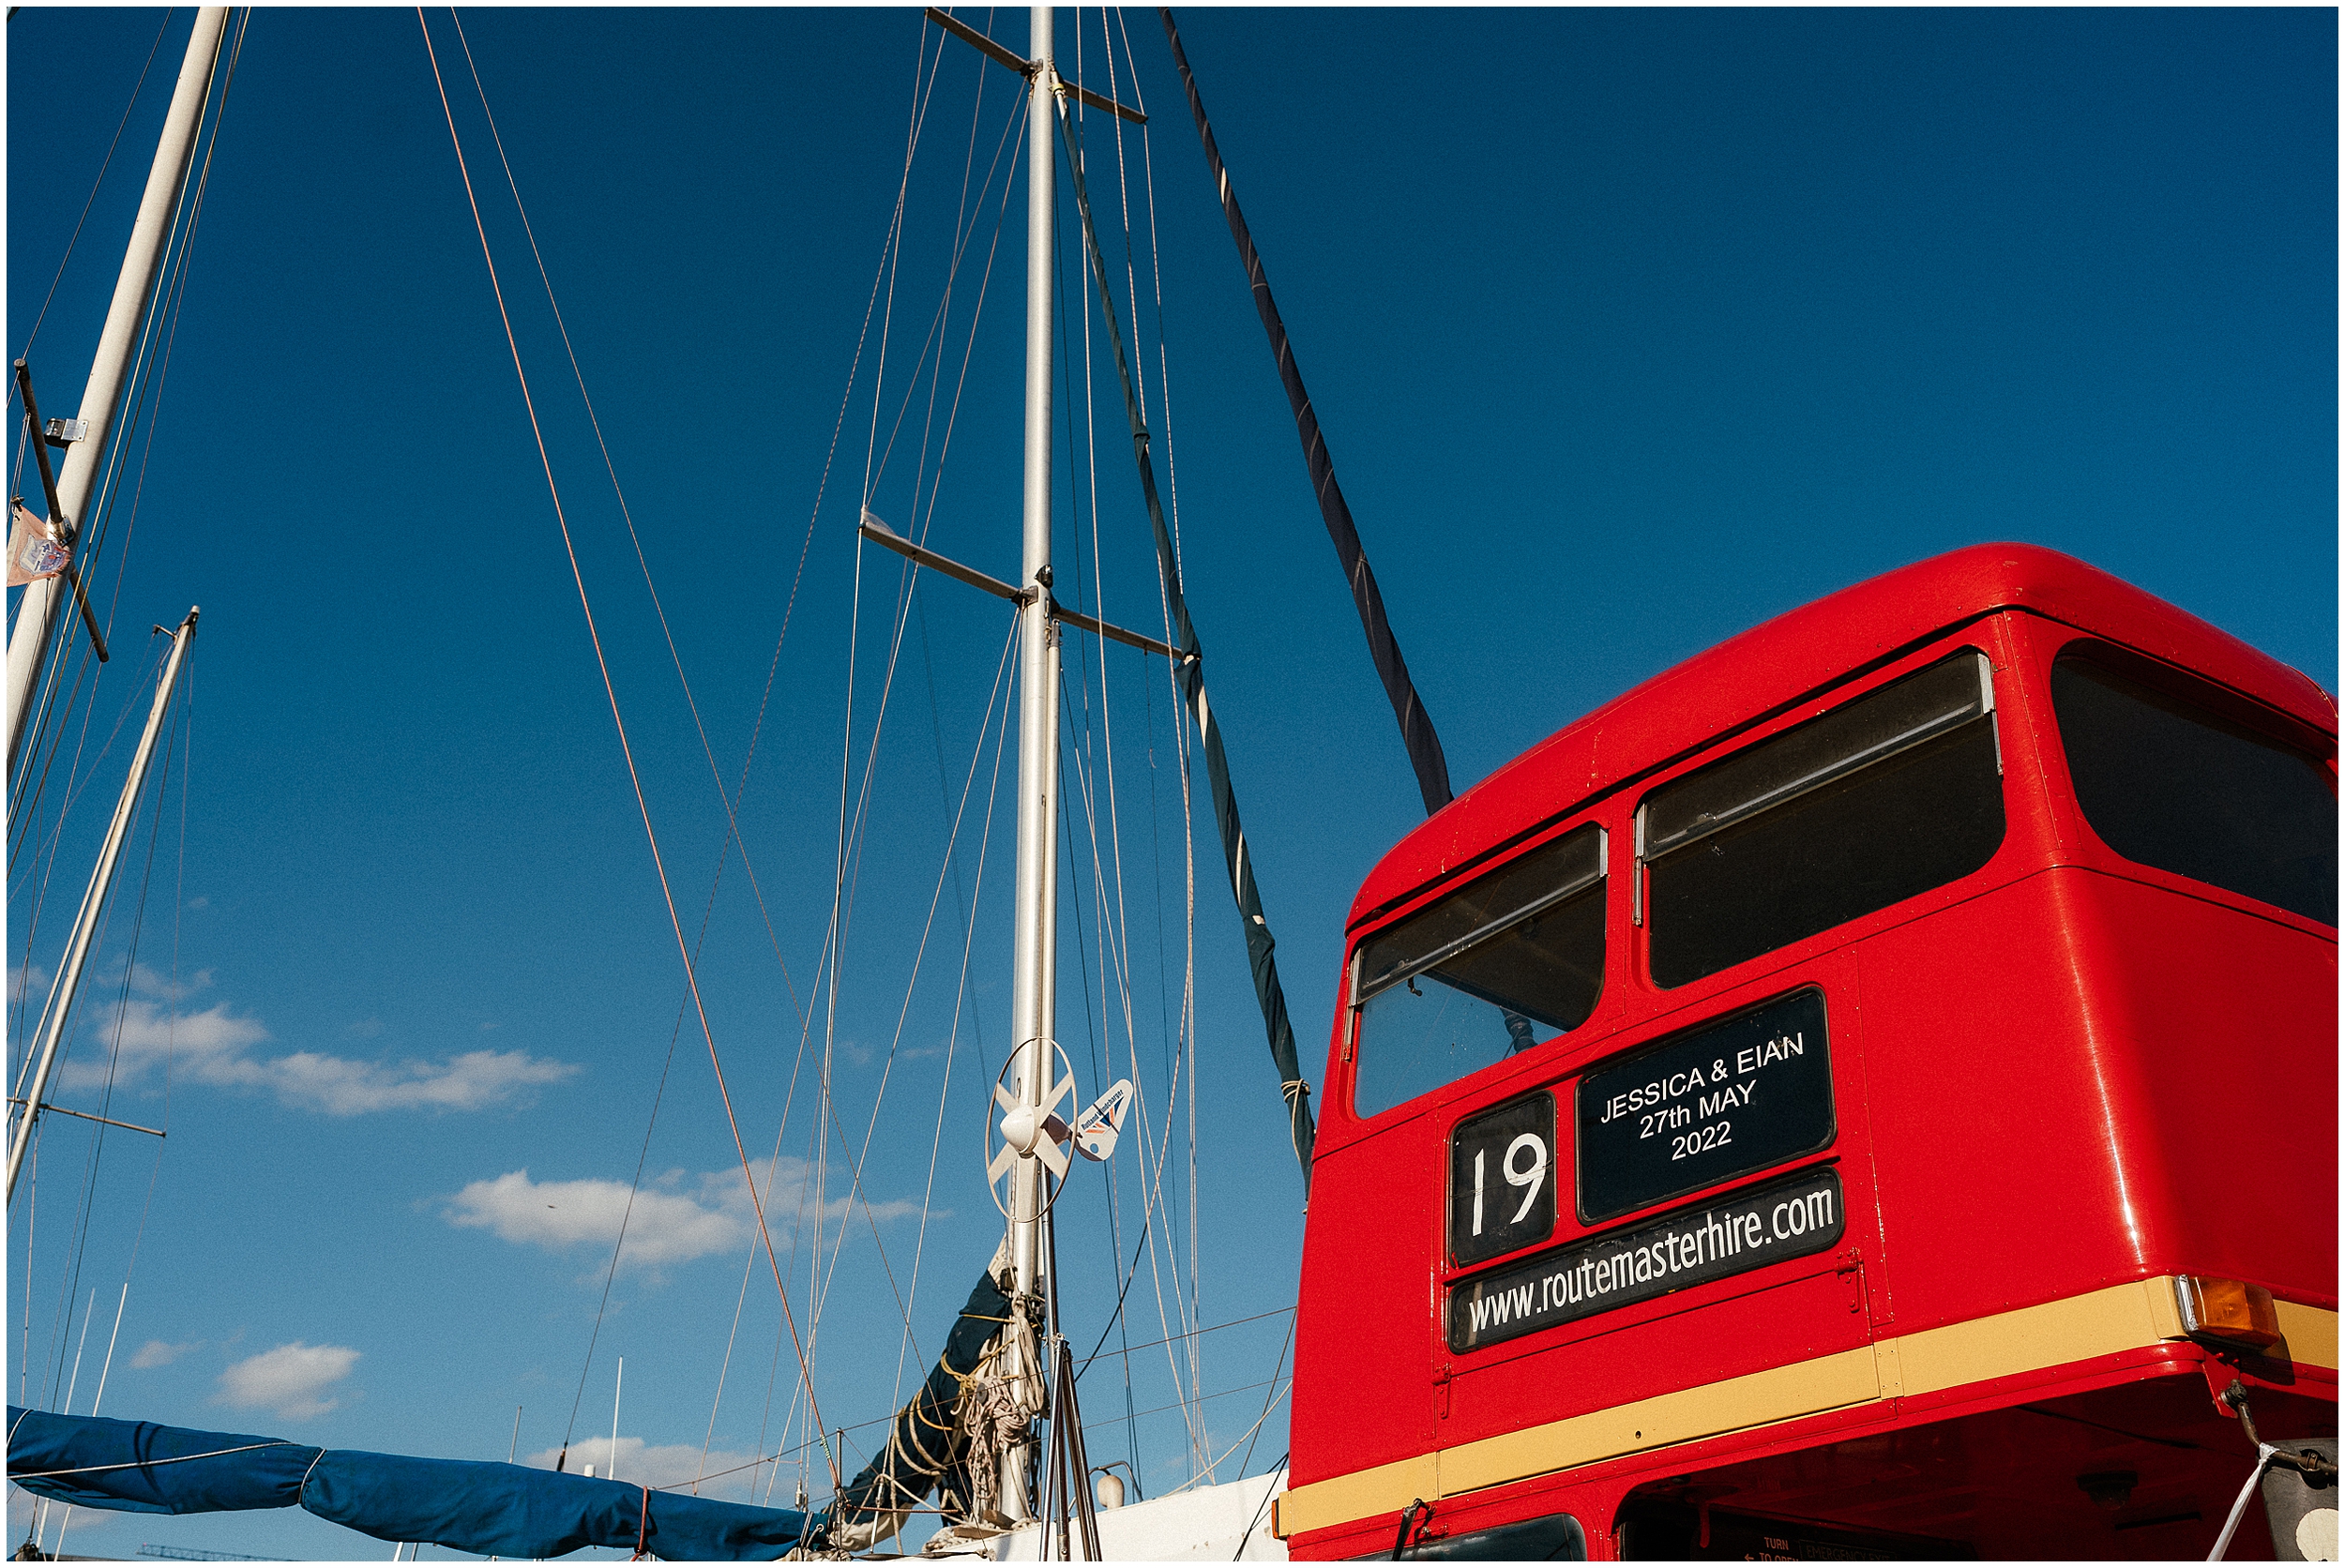 A red bus at the Greenwich Yacht Club in London. 